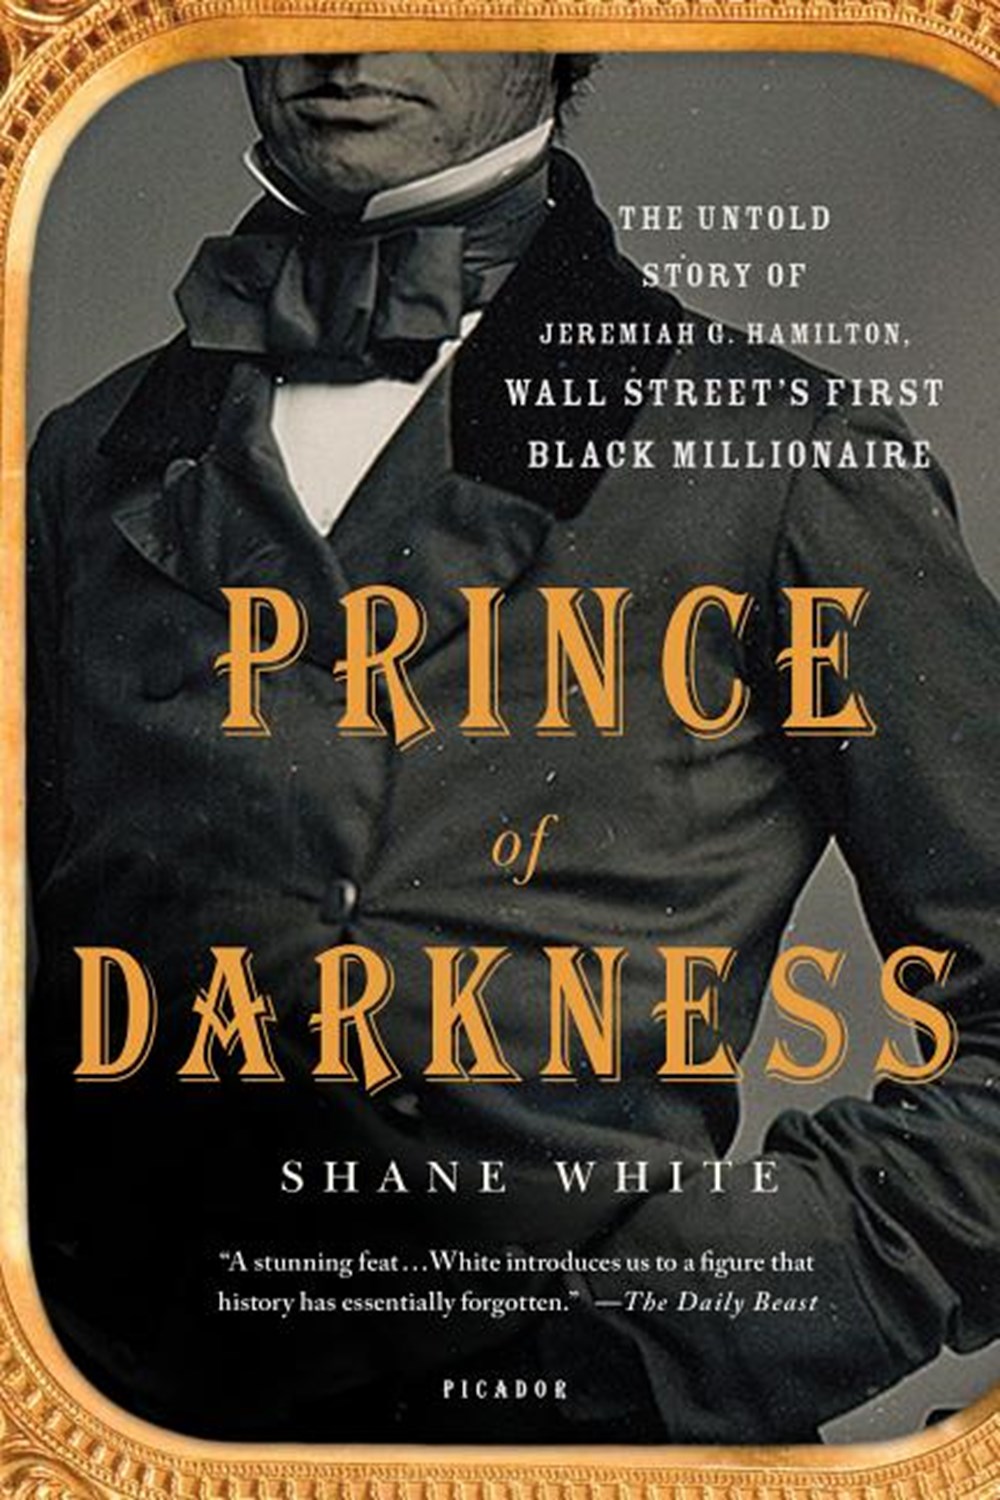 Prince of Darkness The Untold Story of Jeremiah G. Hamilton, Wall Street's First Black Millionaire